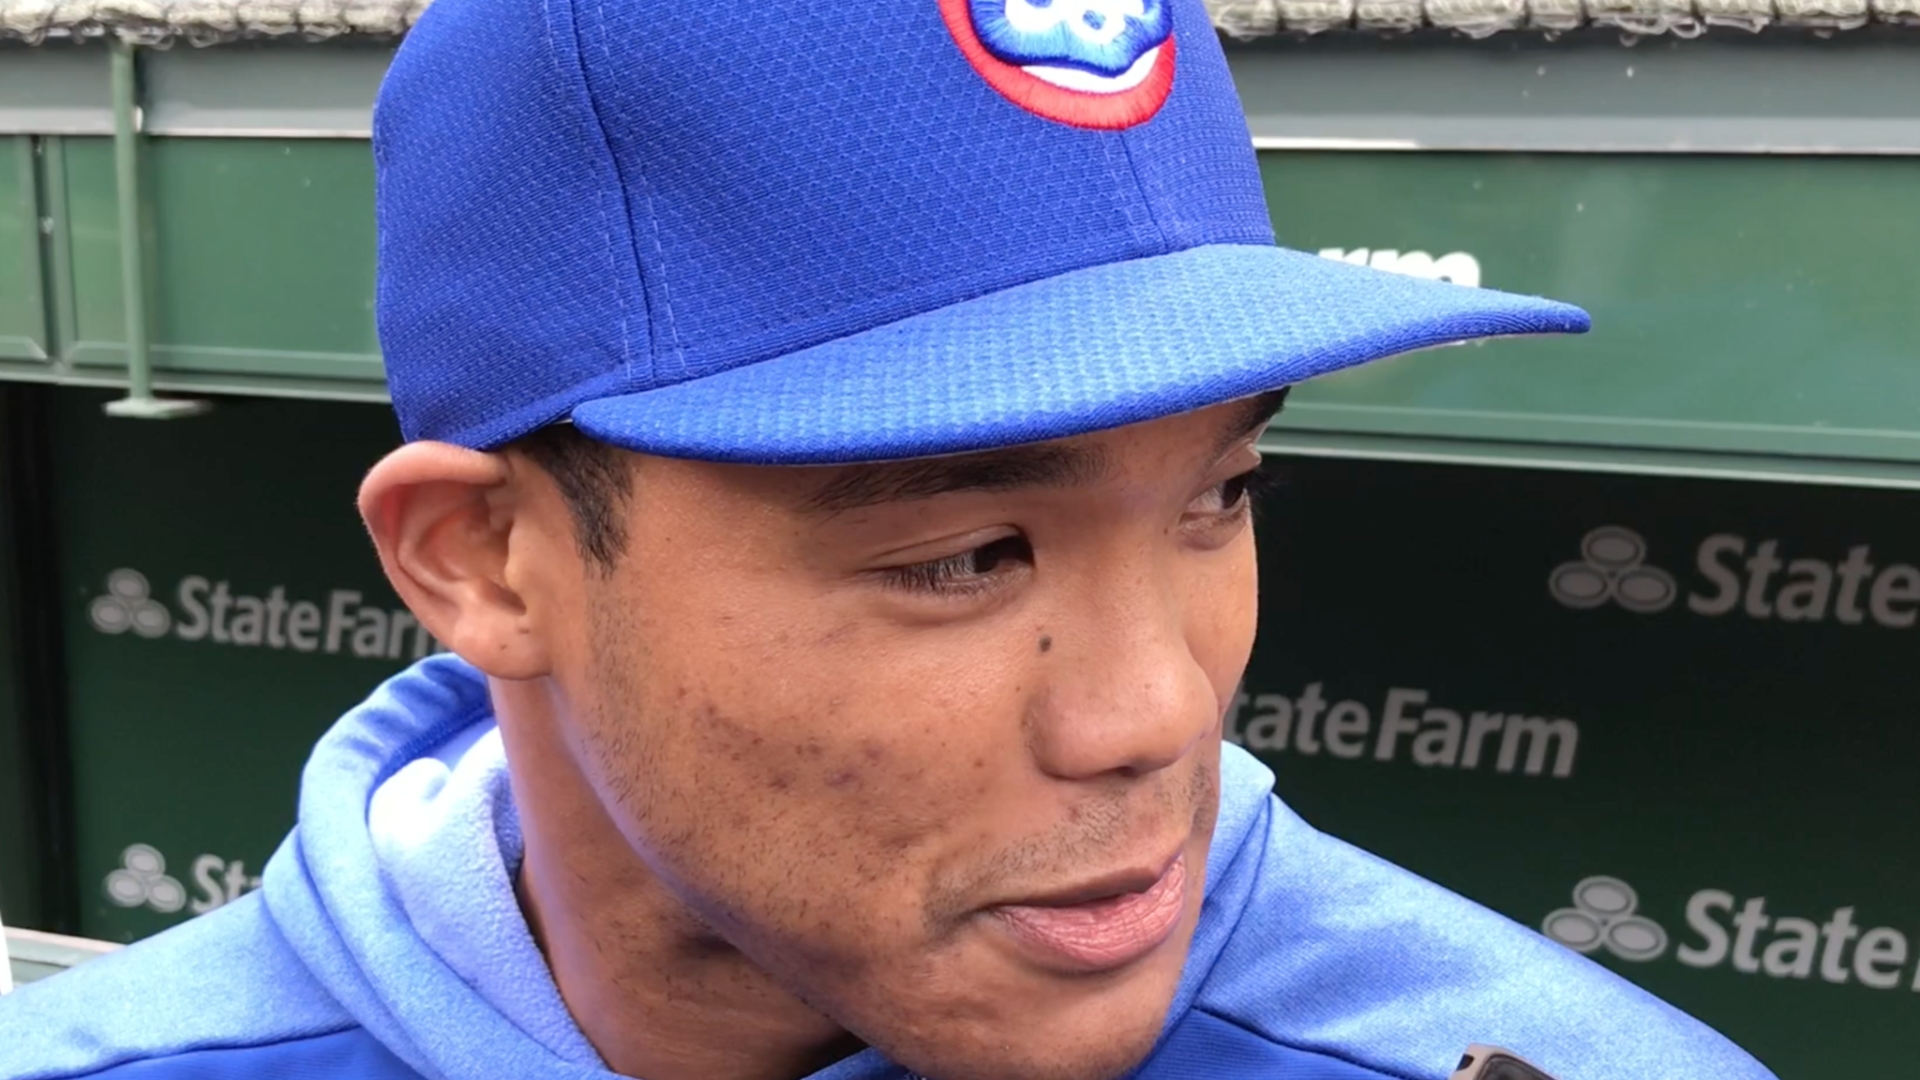 Addison Russell, back with the Cubs after a suspension for domestic  violence, says 'I'm still improving as a person